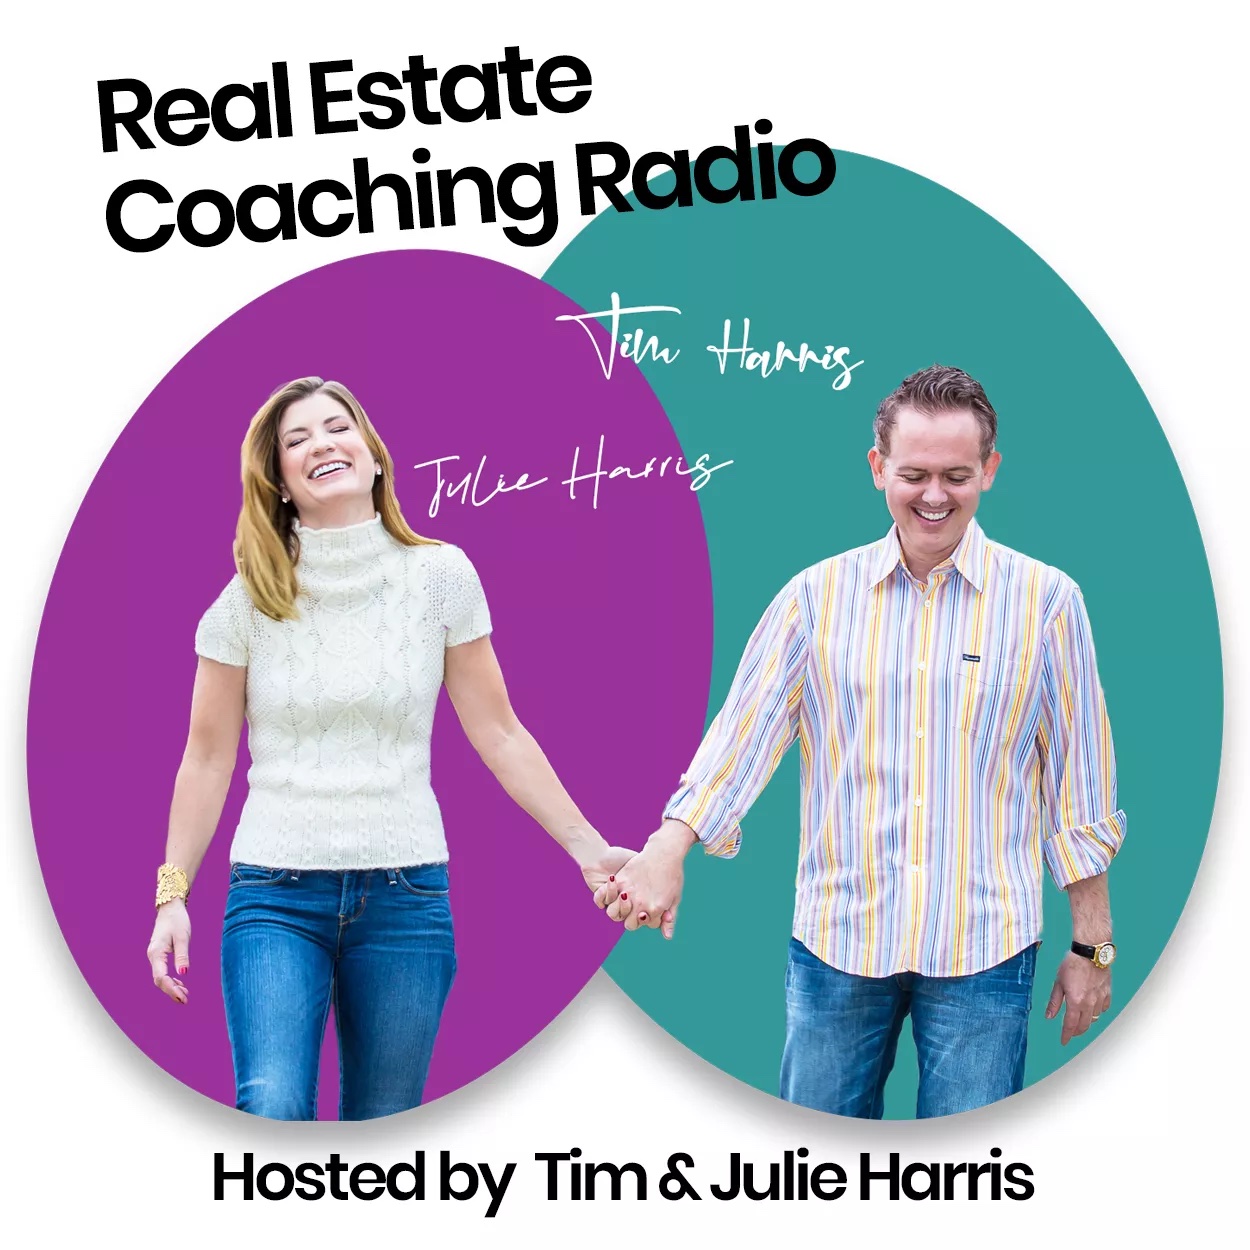 Fresh update on "six weeks" discussed on Real Estate Coaching Radio